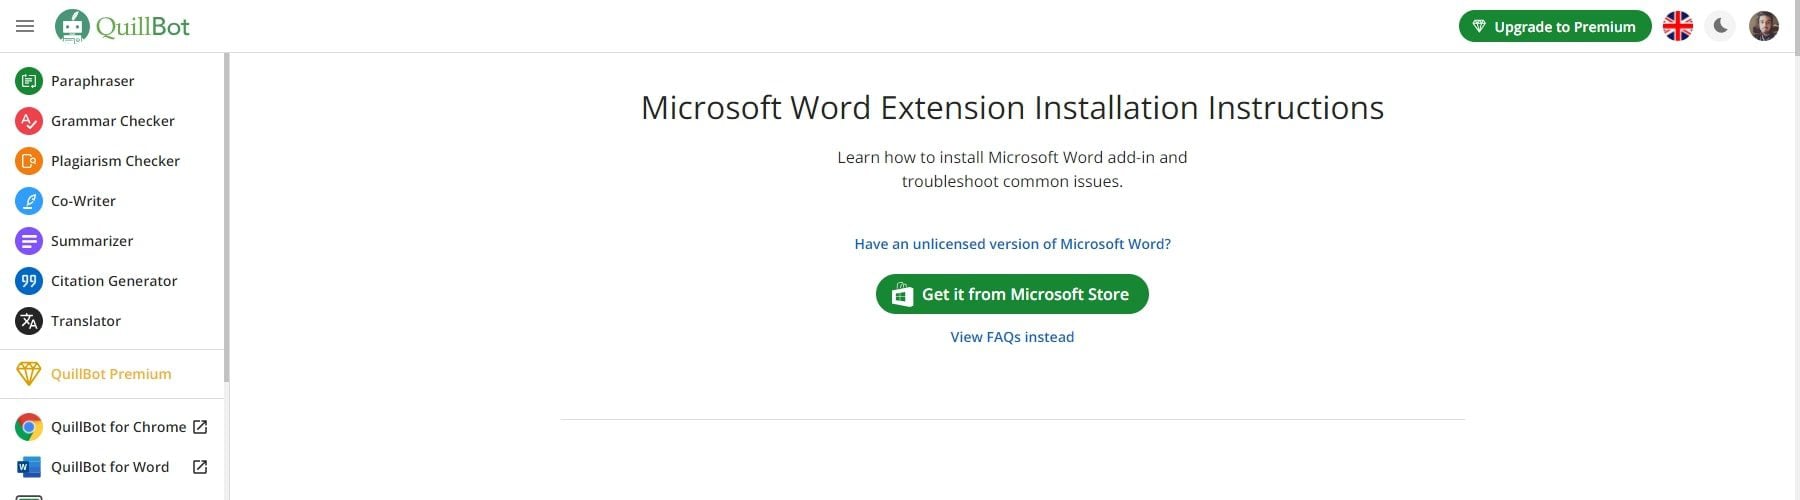 Quillbot AI Microsoft Word extension